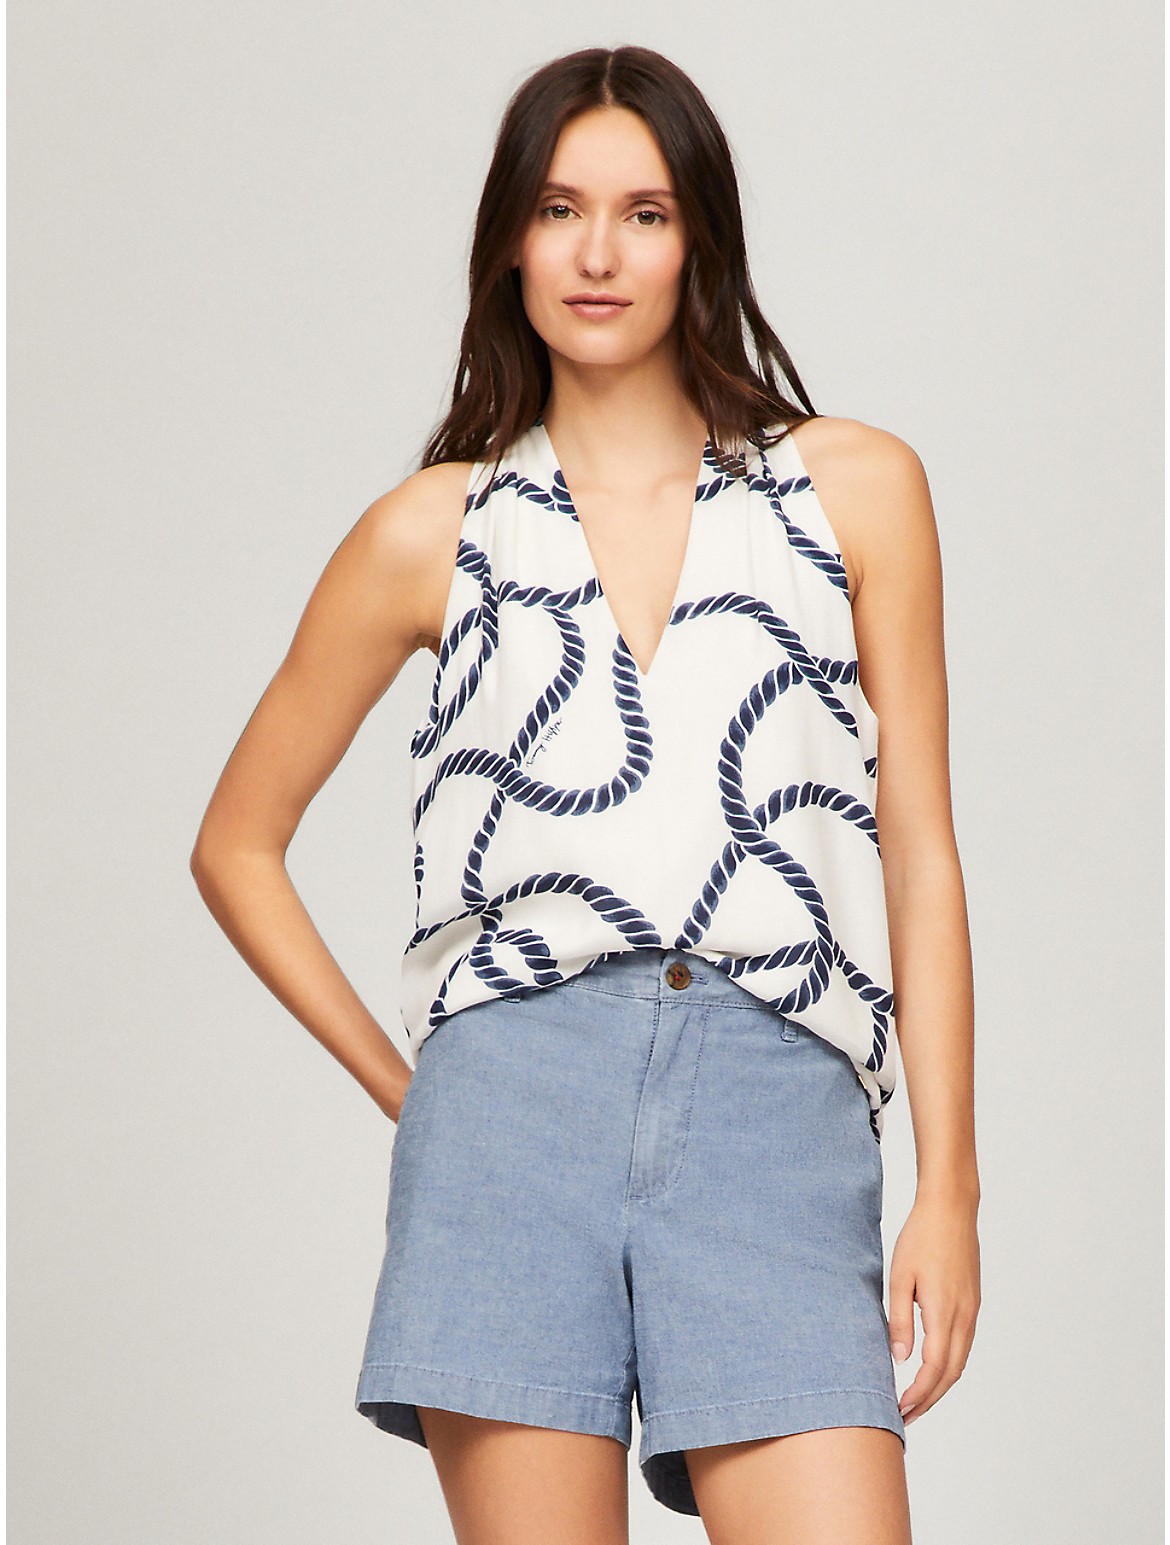 Tommy Hilfiger Women's Nautical Rope Print Halter Top